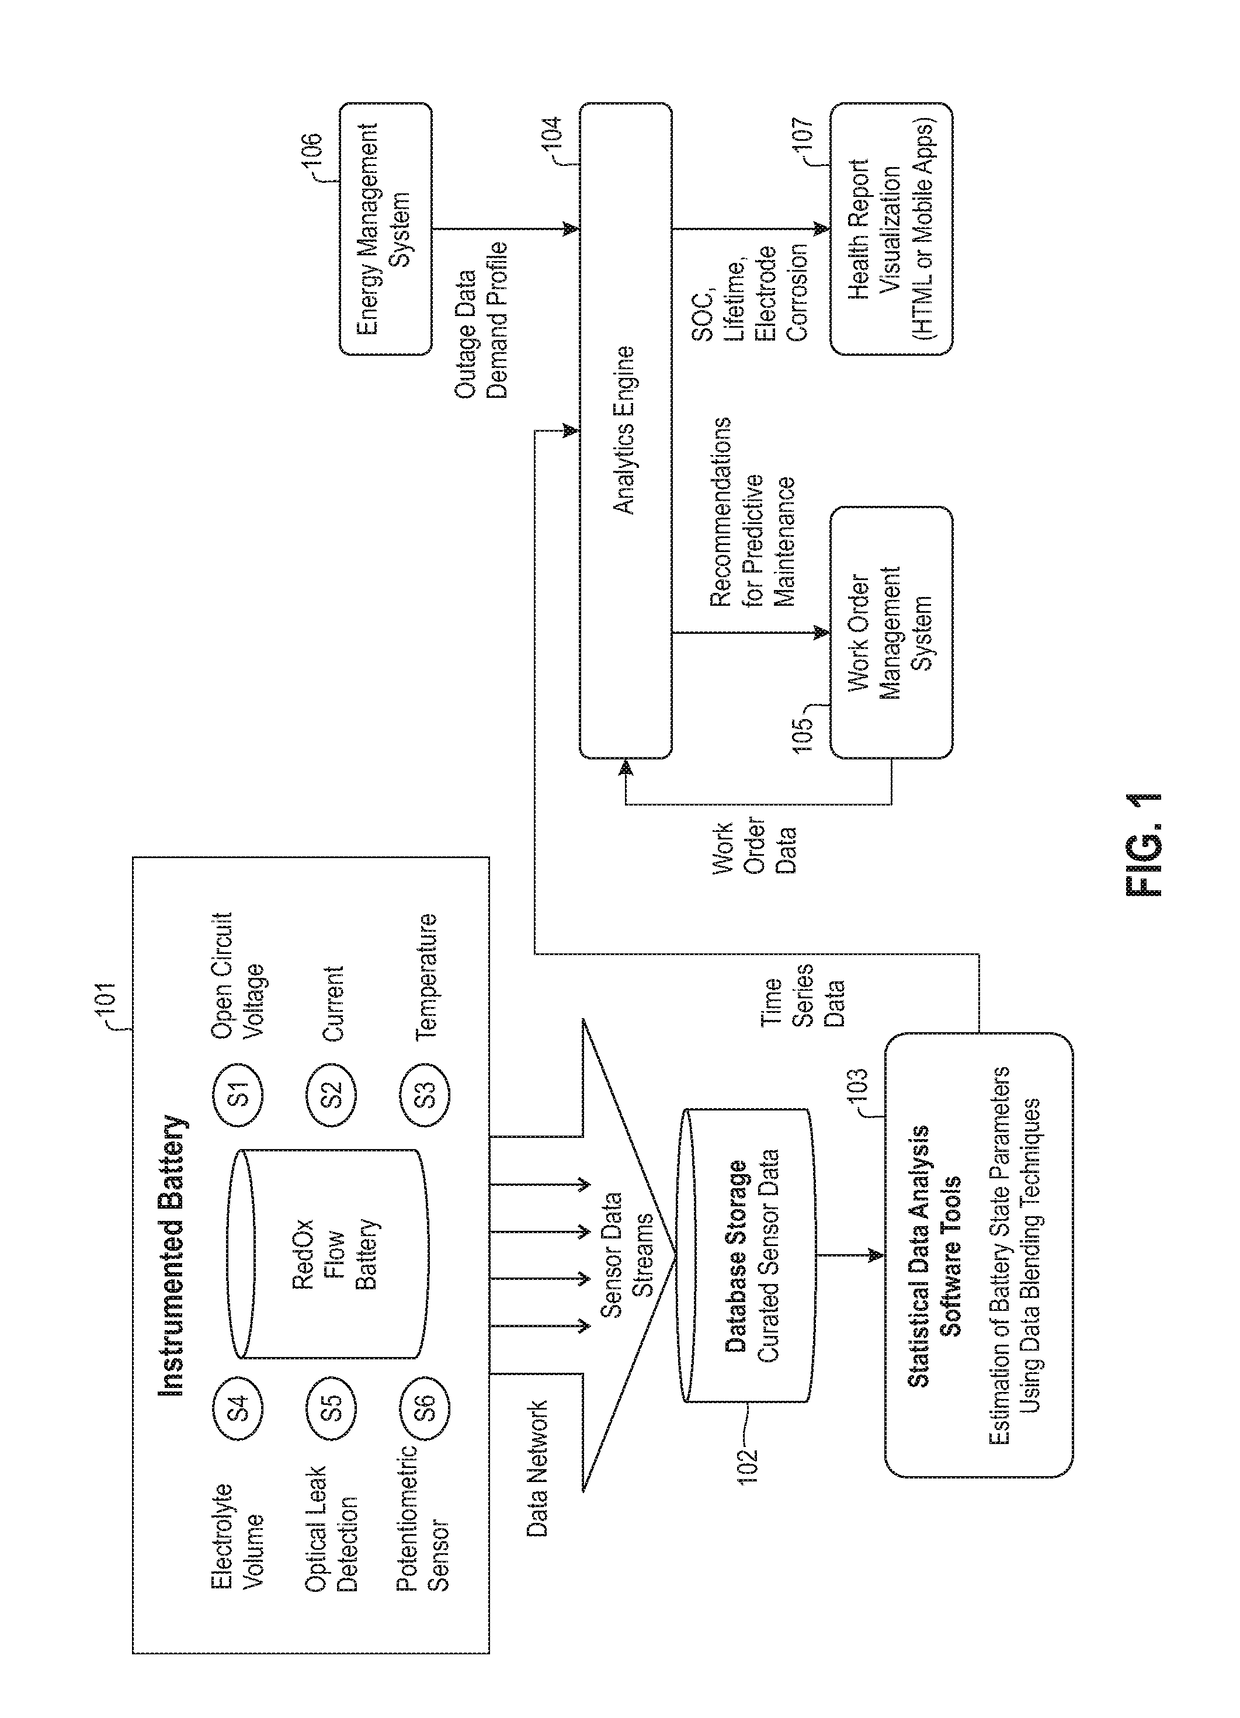 System and method for condition monitoring of redox flow batteries using data analytics